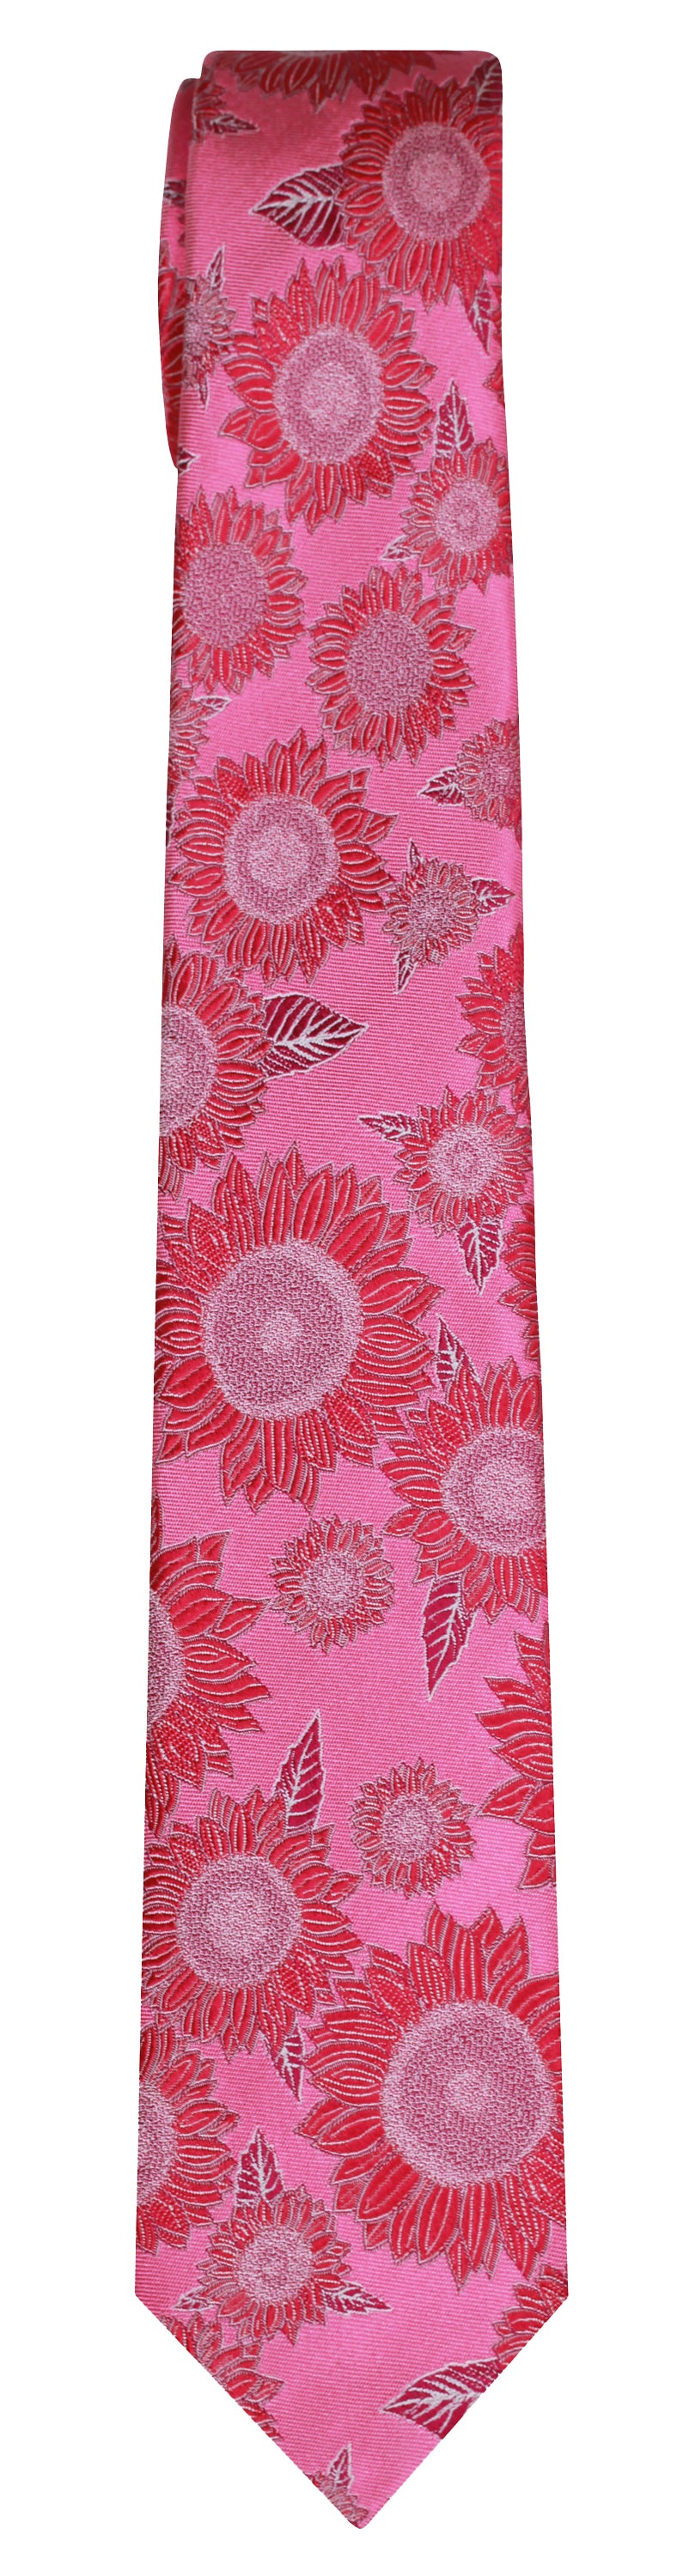 Mimi Fong Sunflower Tie in Pink